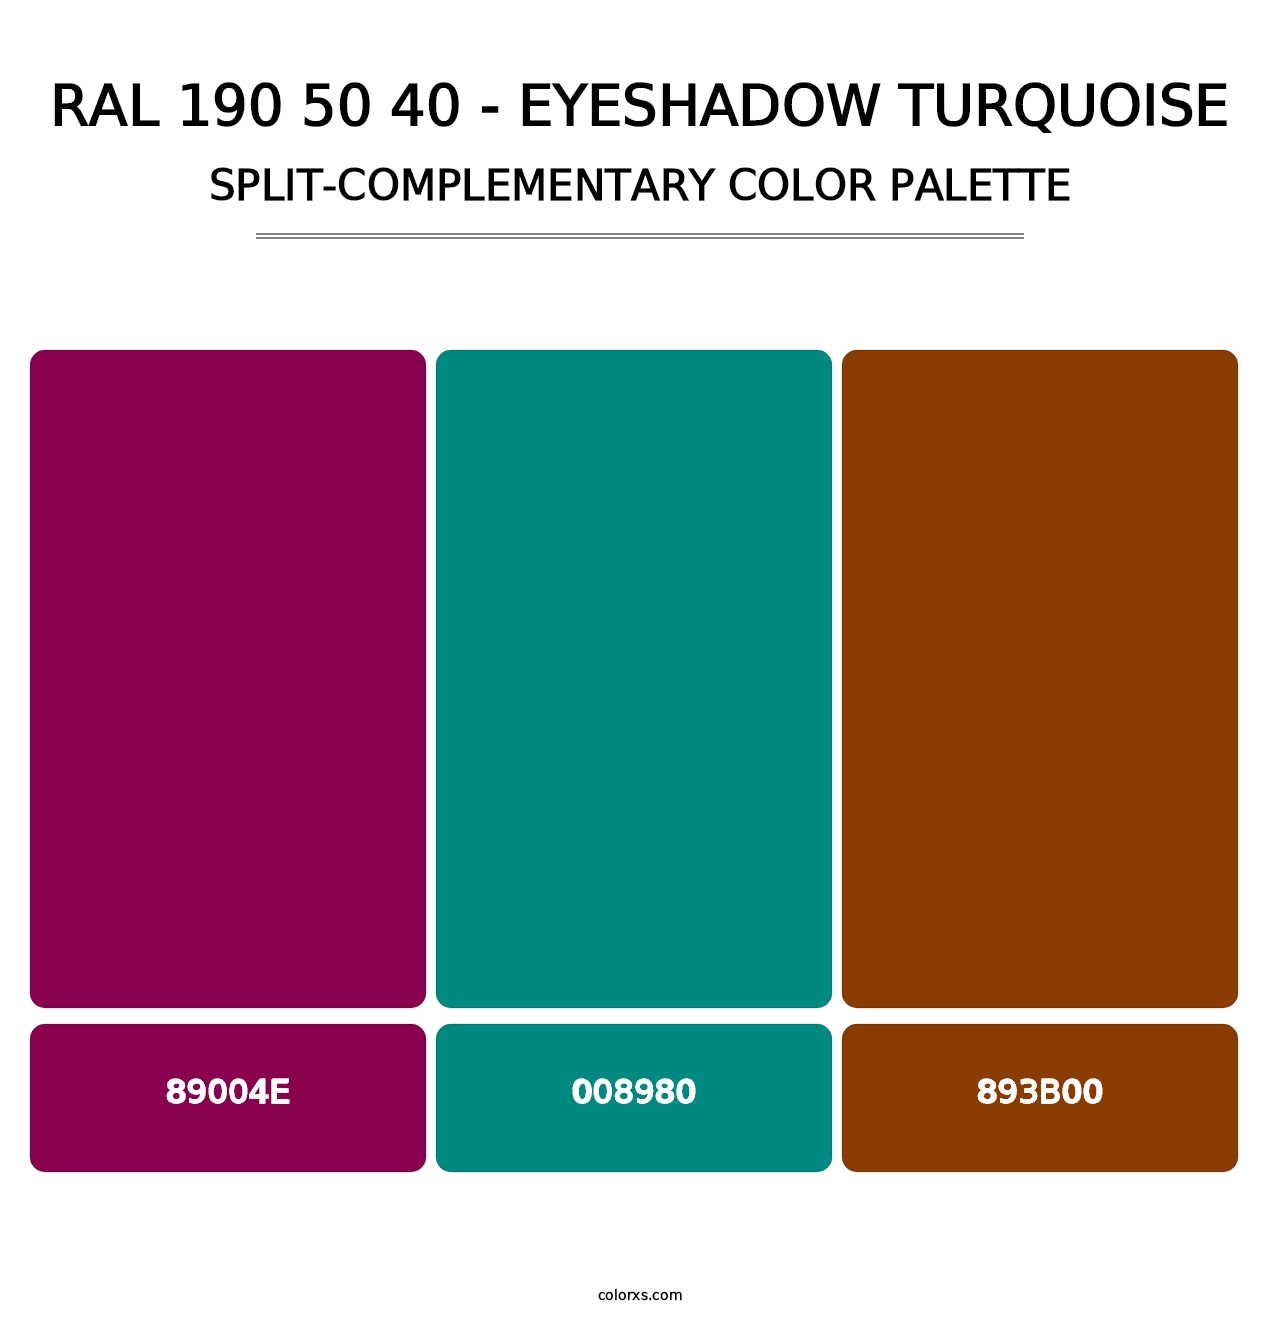 RAL 190 50 40 - Eyeshadow Turquoise - Split-Complementary Color Palette